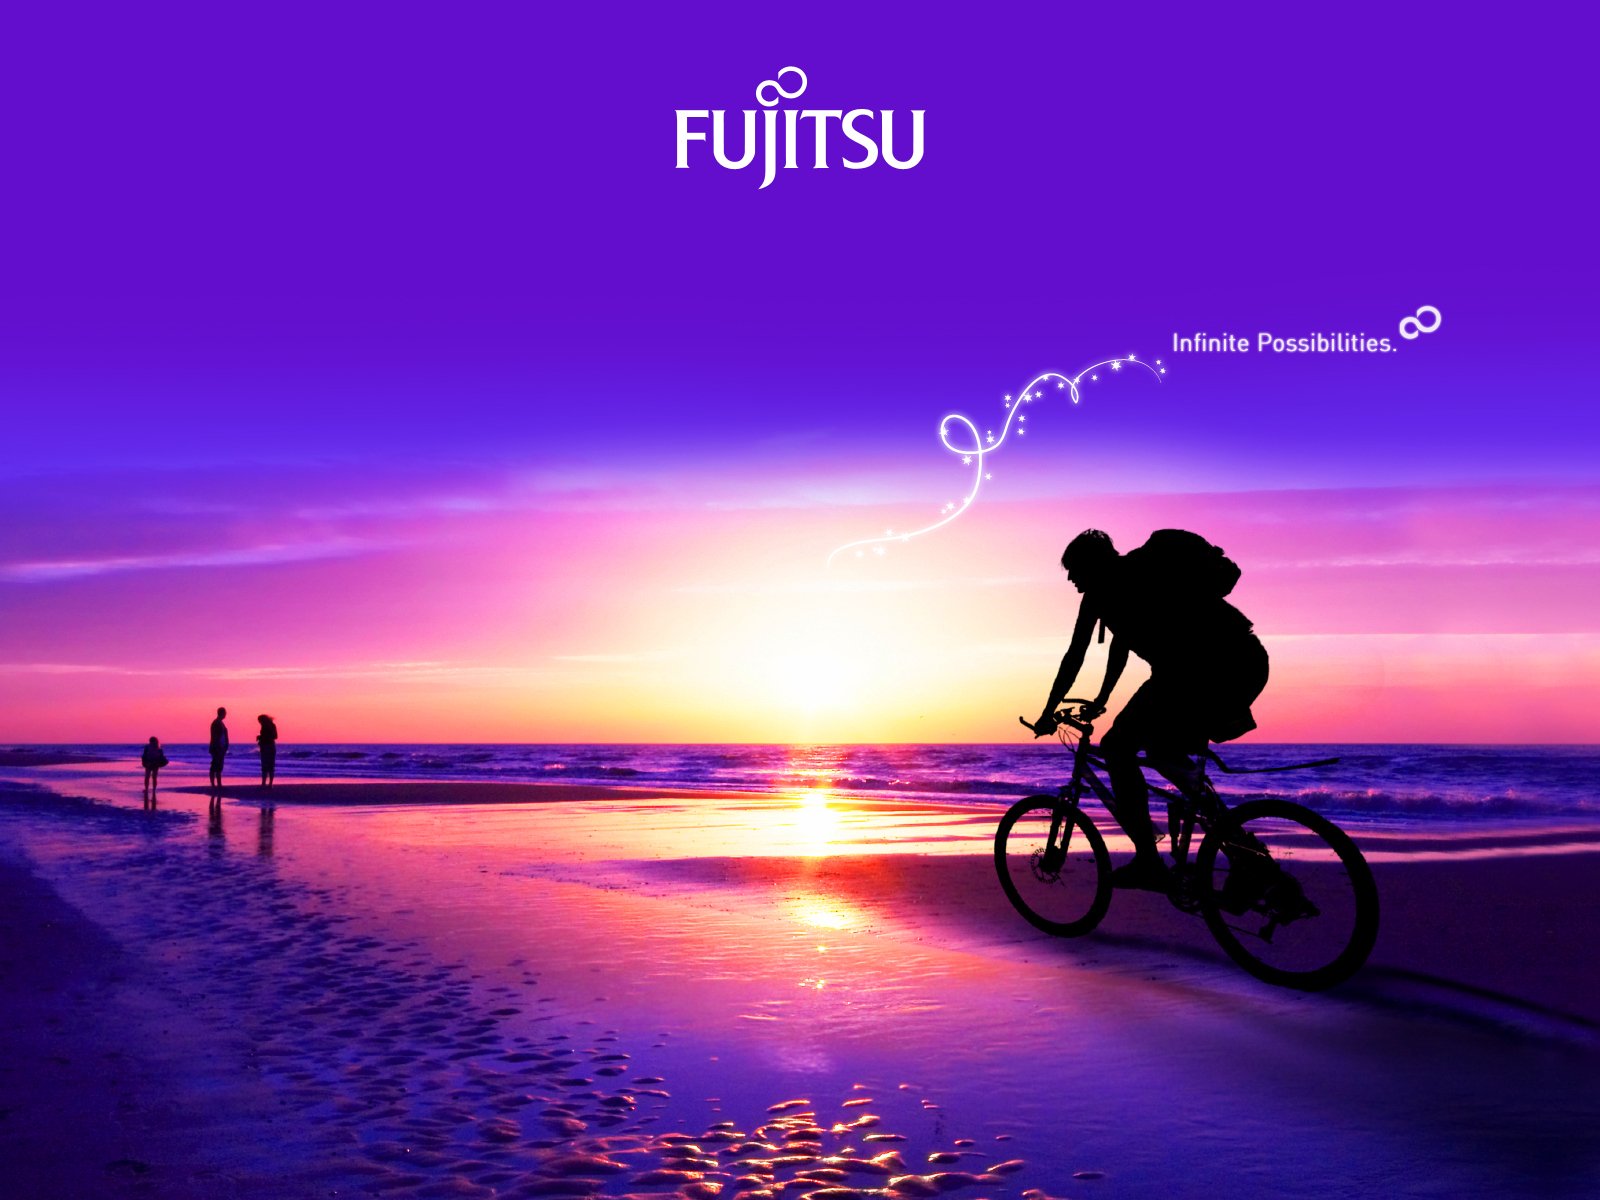 Fujitsu Hd Wallpapers And Backgrounds